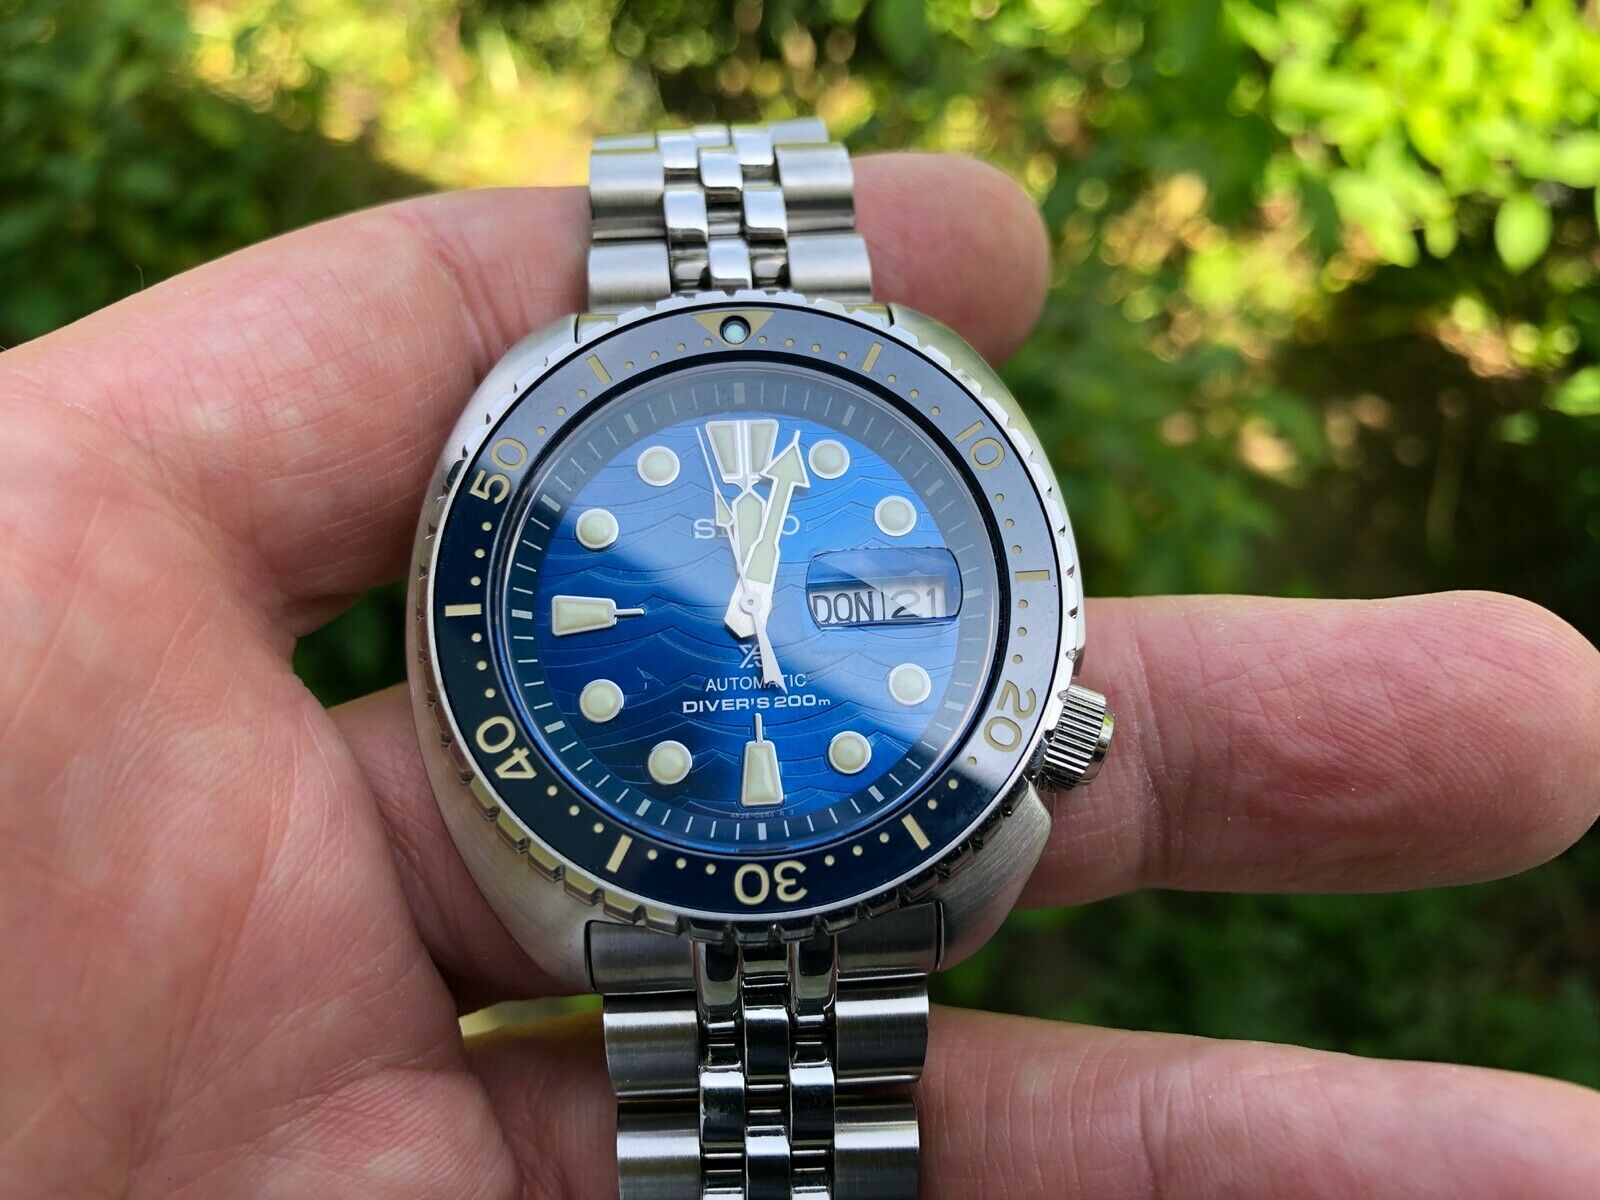 Seiko] My SRPC91 “Save The Ocean” Turtle on the Strapcode Angus